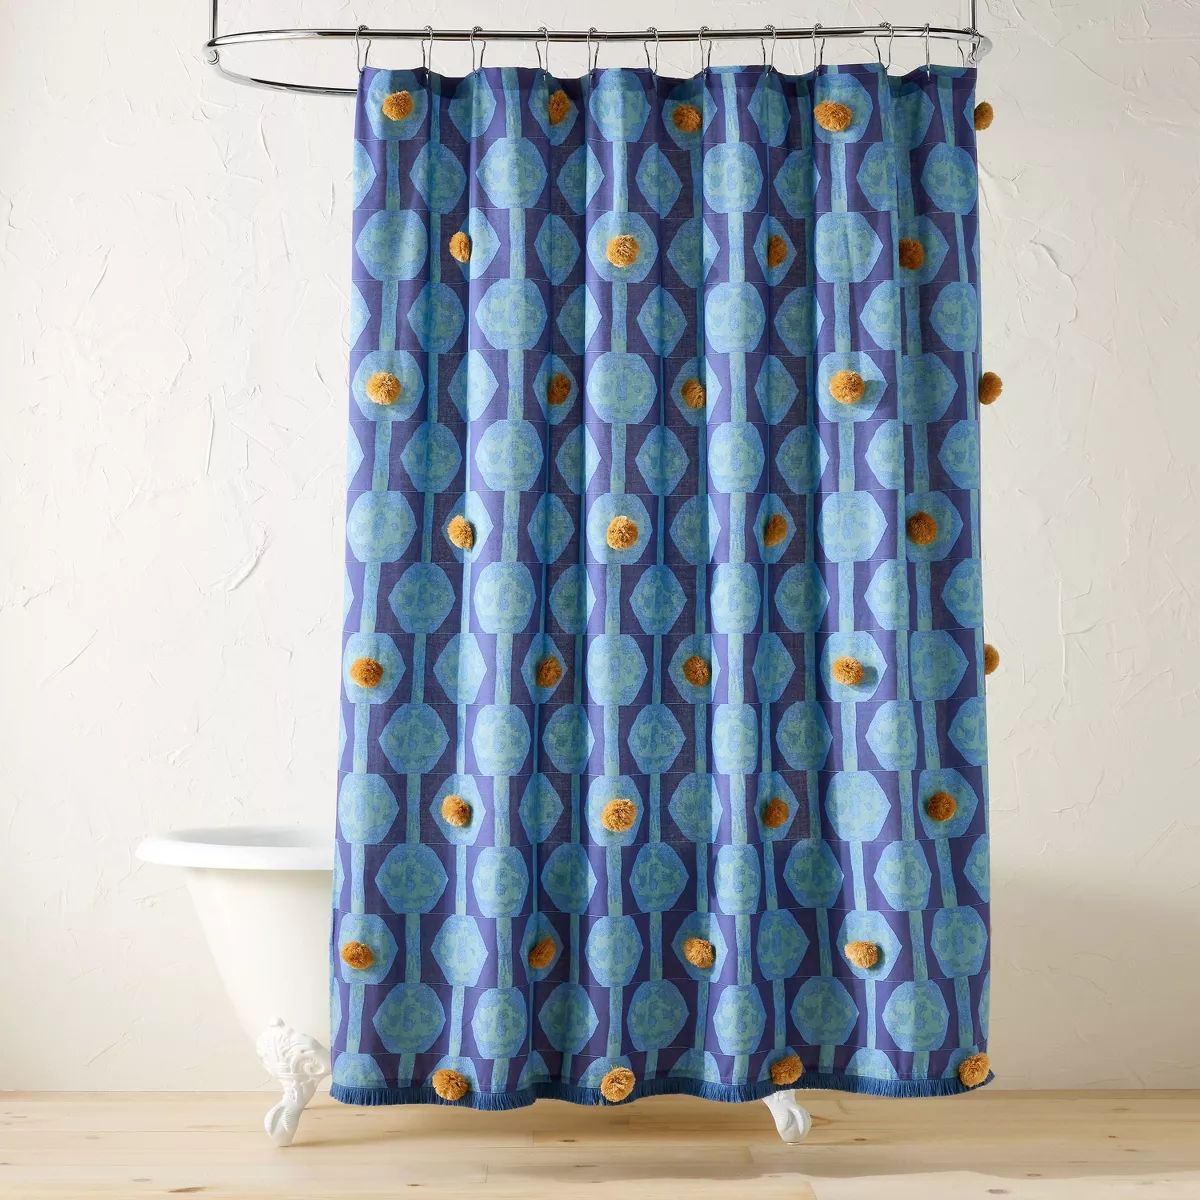 In The Name of Love Shower Curtain with Poms Blue - Opalhouse™ designed by Jungalow™ | Target